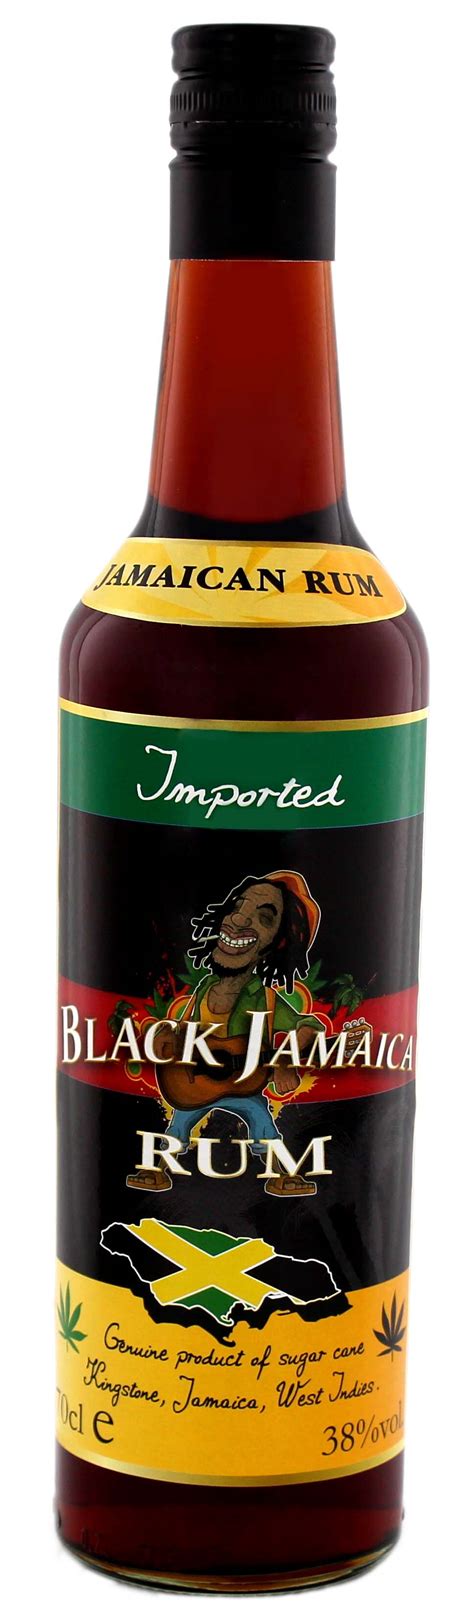 The 2021 staging of the jamaica rum festival virtual experience will showcase the best that the island has to offer in the culturally beloved. Black Jamaica Rum jetzt kaufen im Drinkology Online Shop